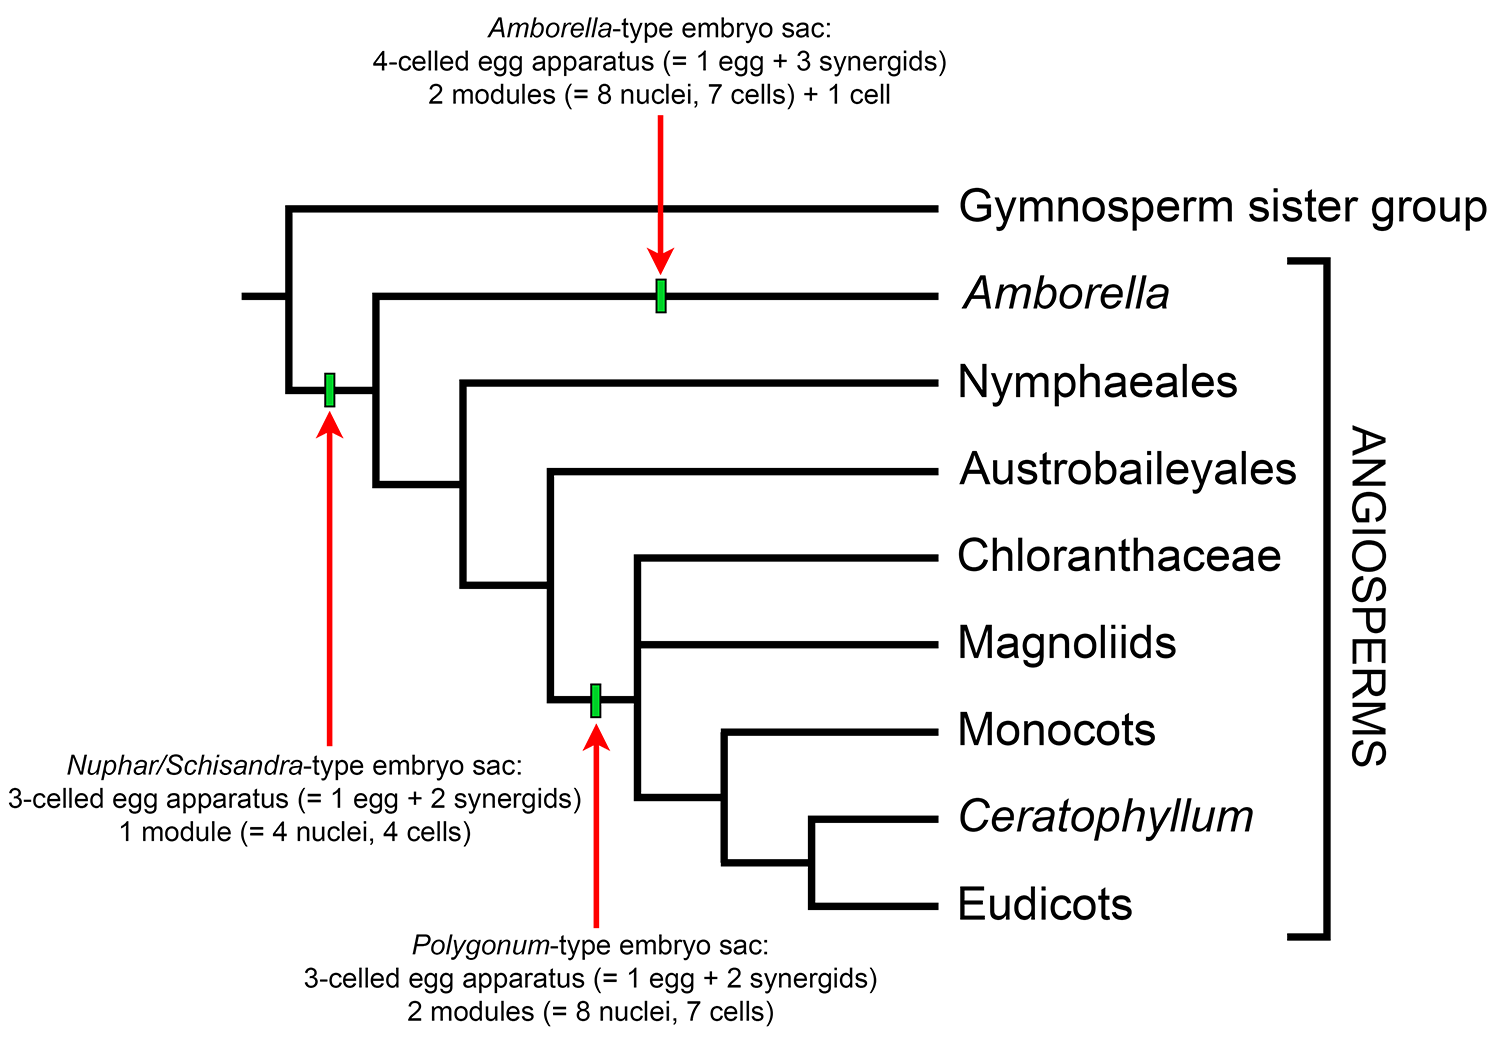 Simplified tree of angiosperm relationships with the Nuphar/Schisandra-type, Amborella-type, and Polygonum-type of embryo sacs mapped.